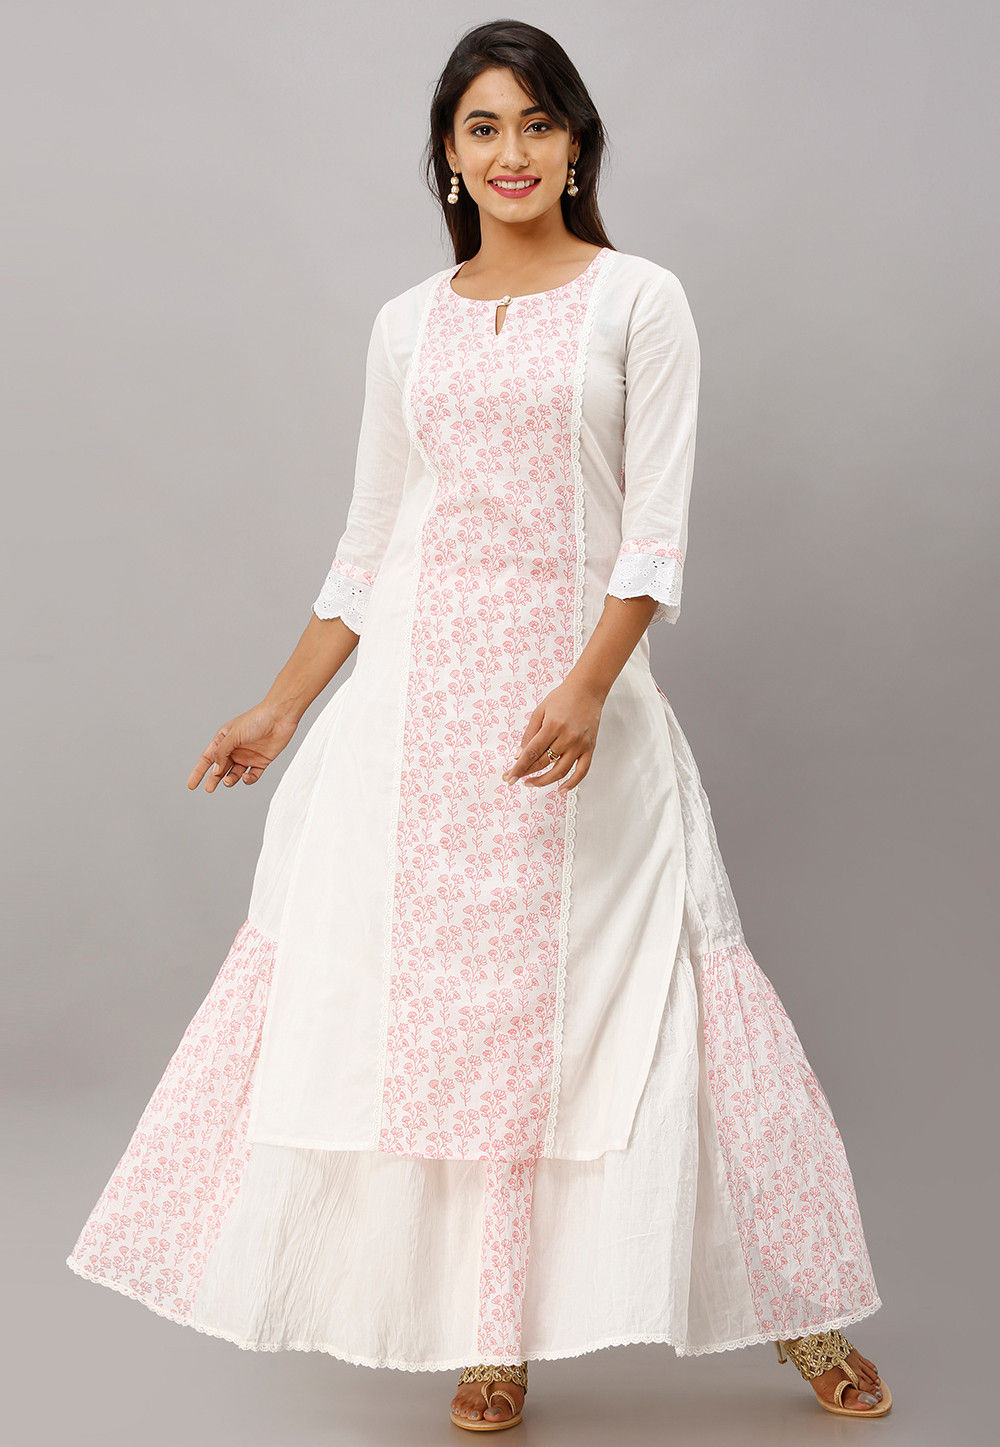 Printed Cotton Kurta with Skirt in White : TUH25